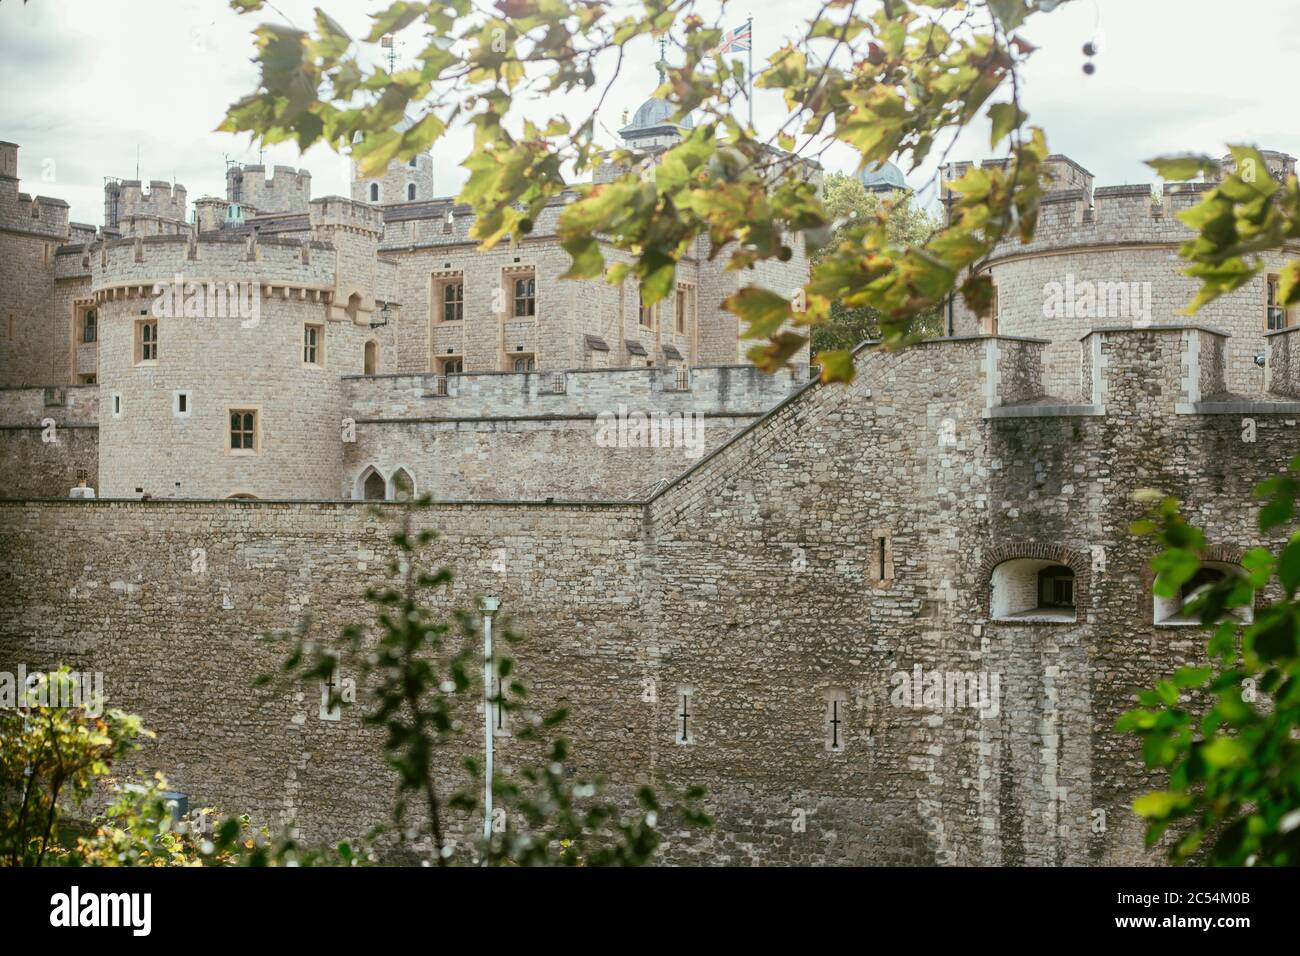 Palace of the Tower of London in Großbritannien Stockfoto